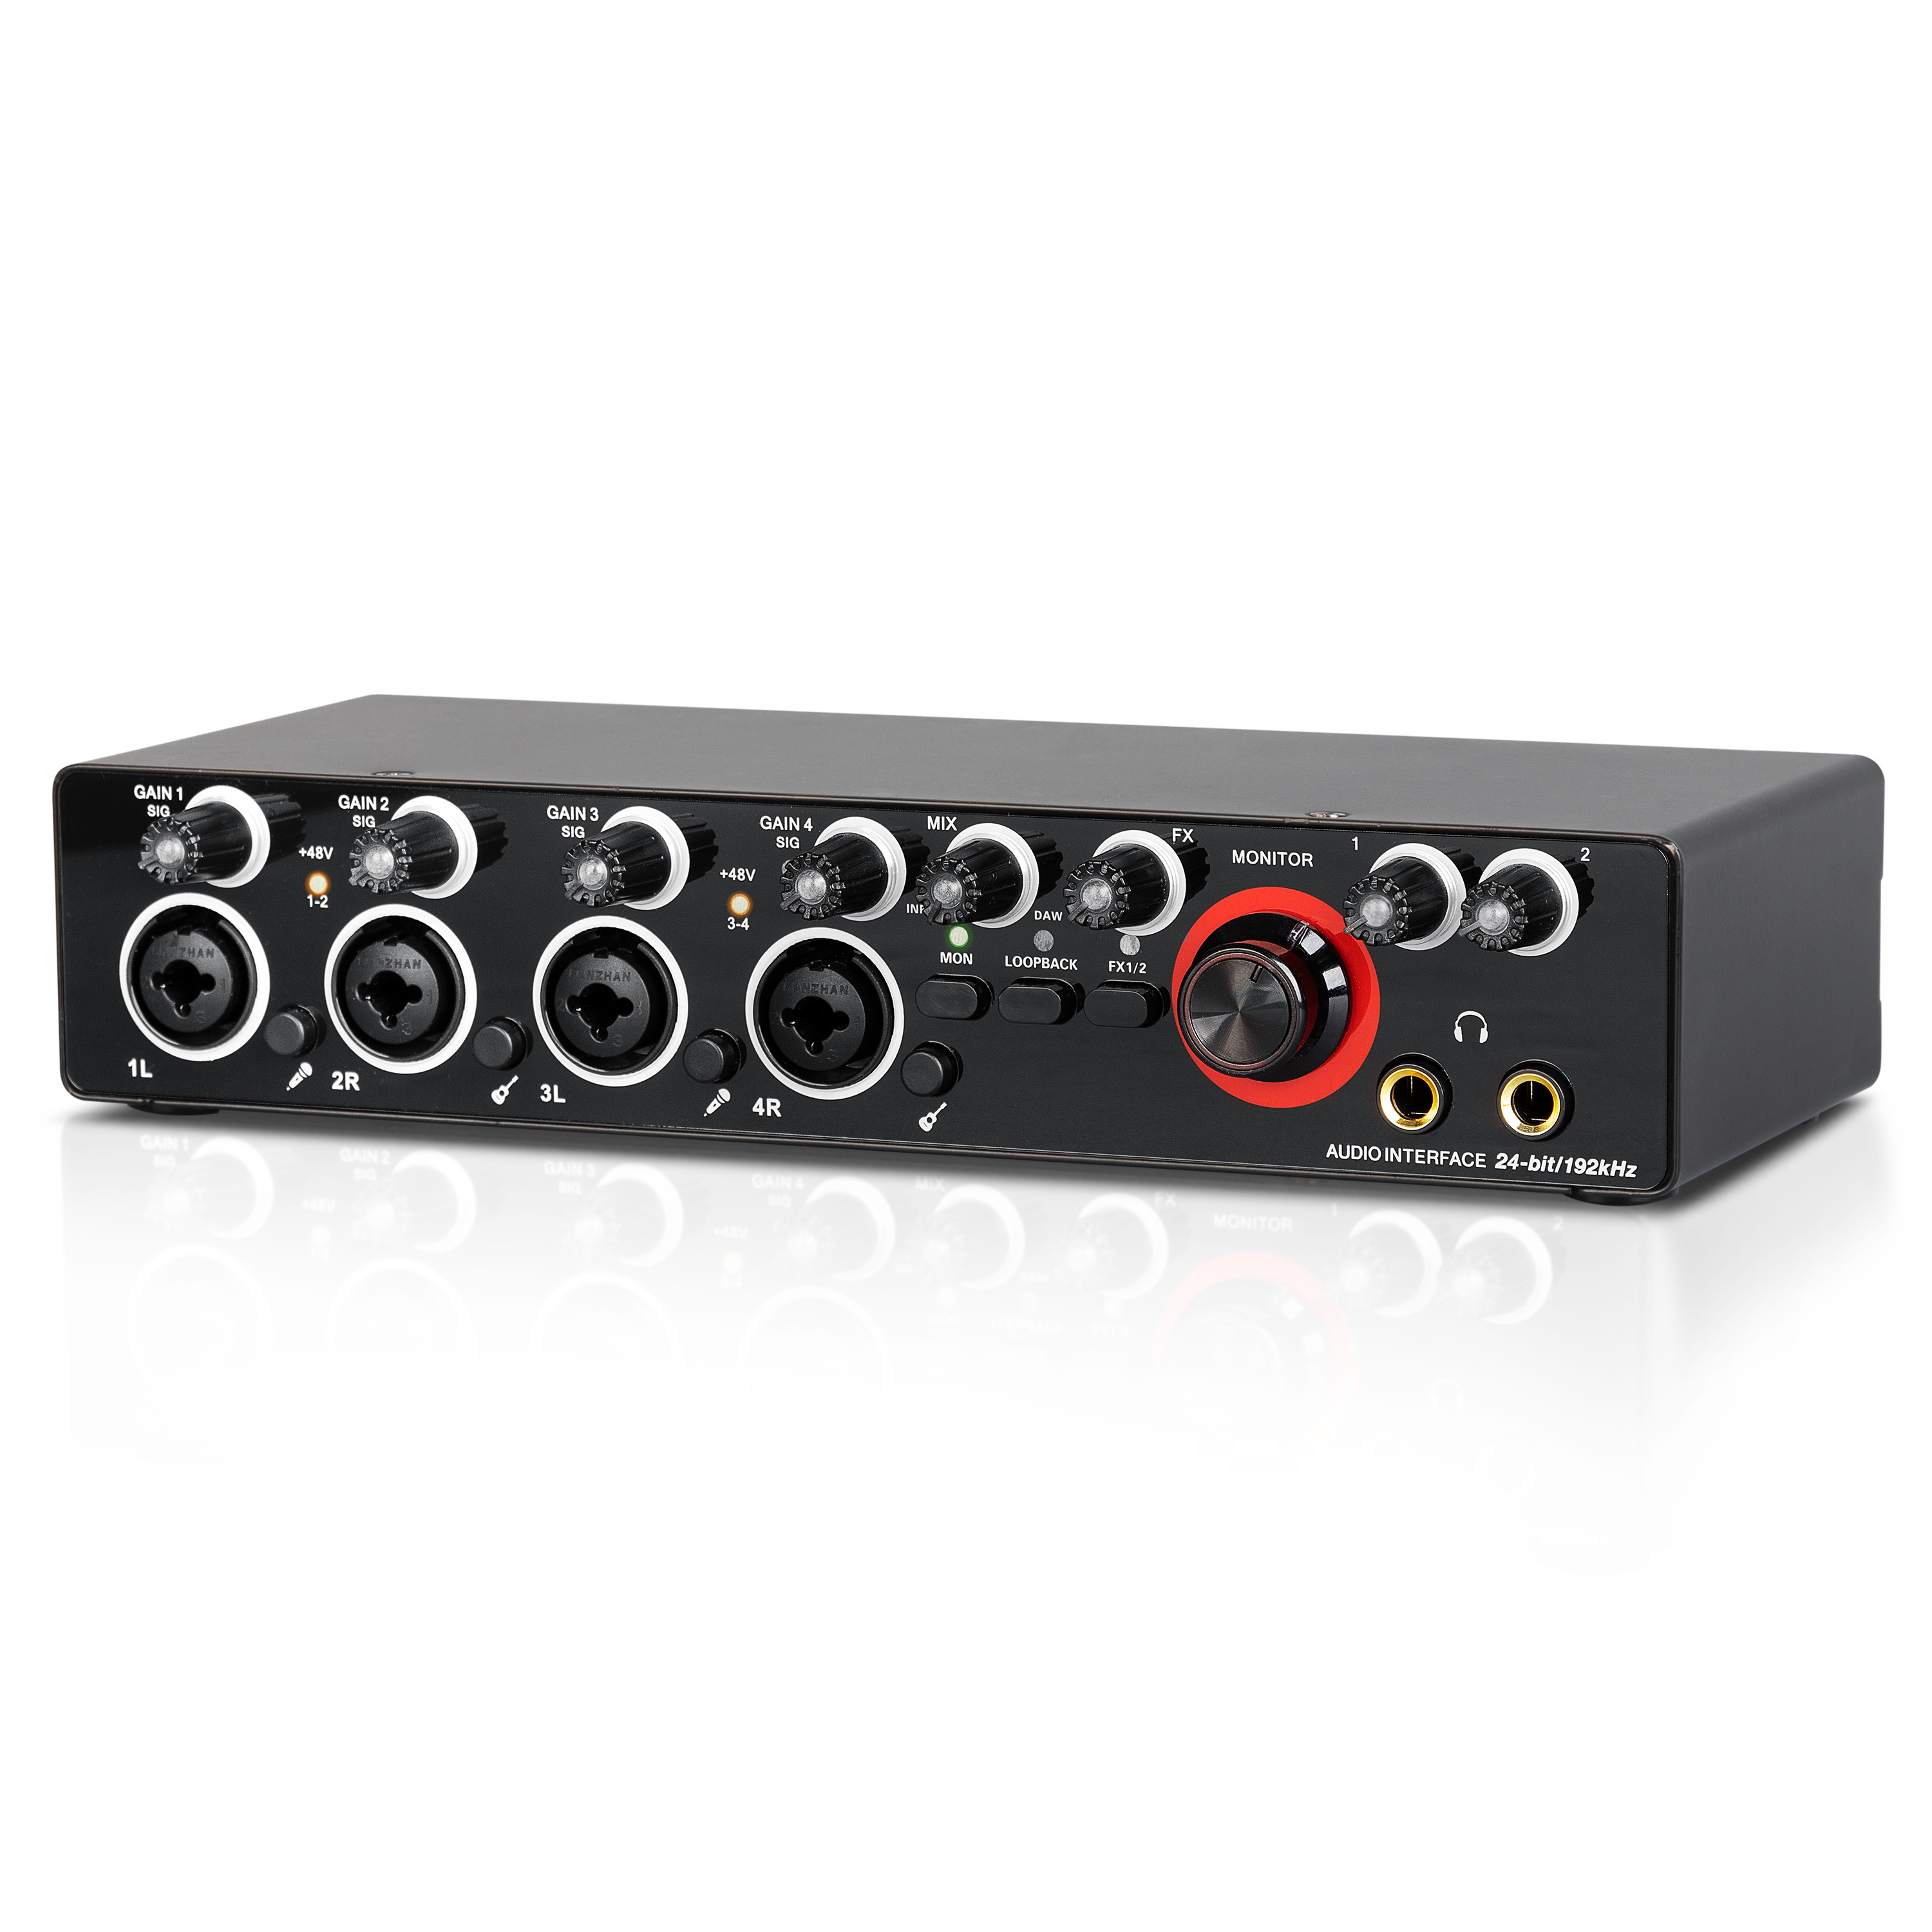 Audio Interface Sound Card With Monitor, Electric Guitar Live Recording  Professional Studio Mixer 24Bit/196kHz For Recording Music, XLR Interface  With